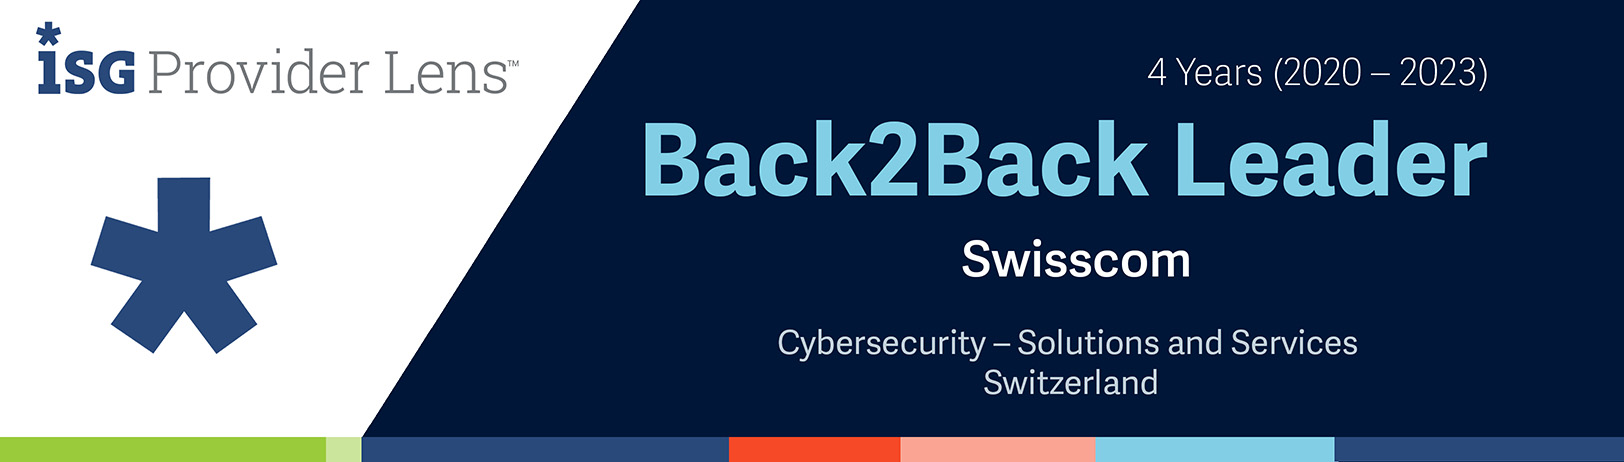 Banner ISG Provider Lens - Back2Back Leader, 4 Years (2020 - 2023), Swisscom. Cybersecurity - Solution and Services Switzerland.